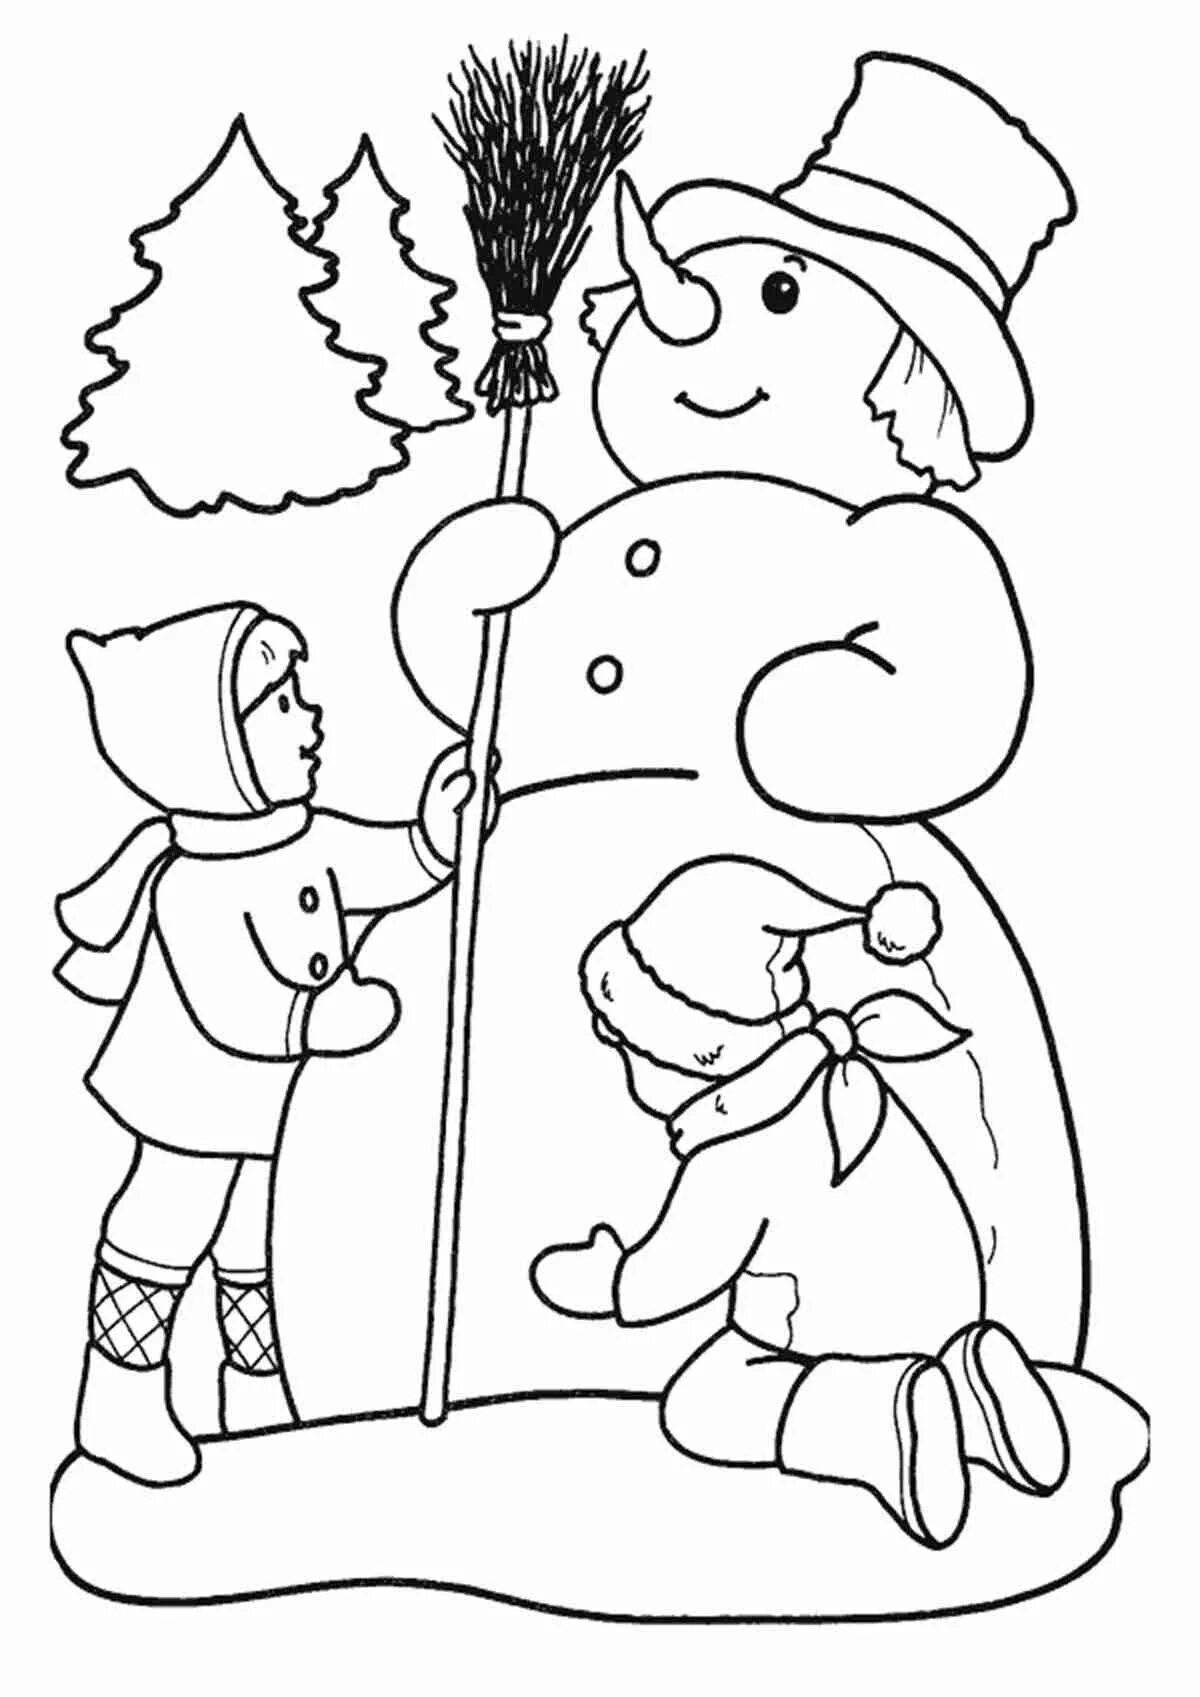 Christmas bright funny coloring book